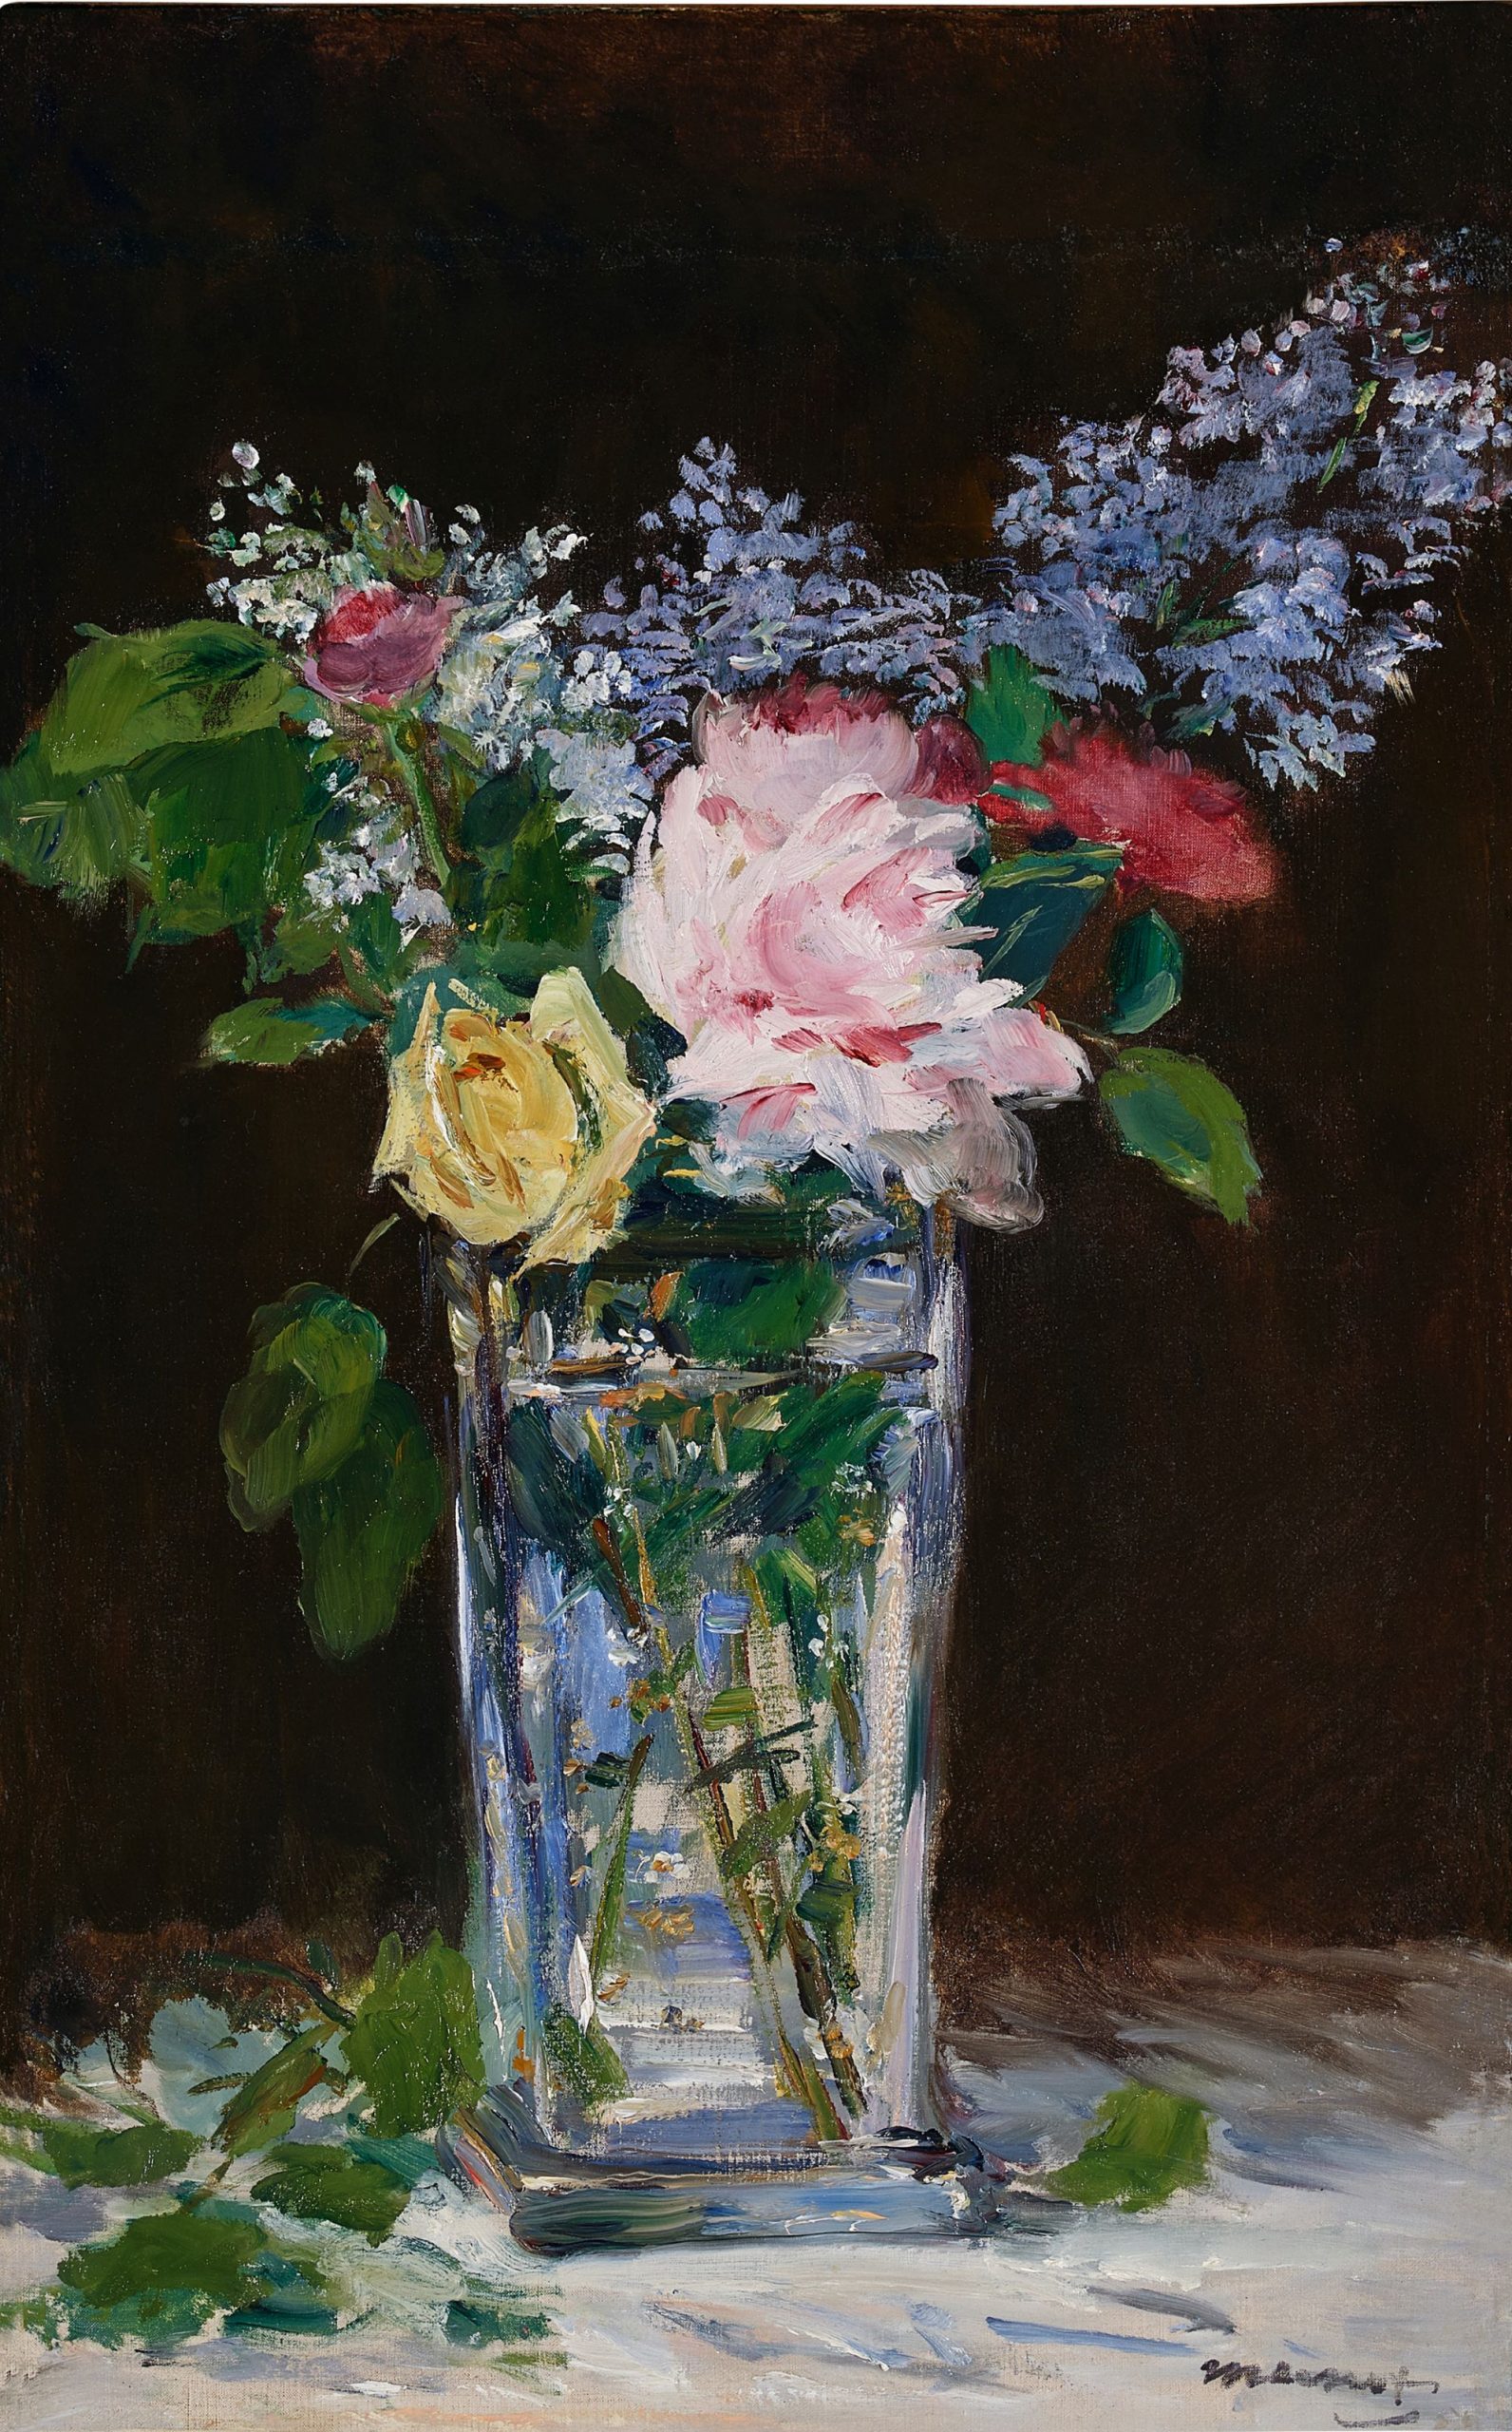 Rare Manet Painting Is On View in New York